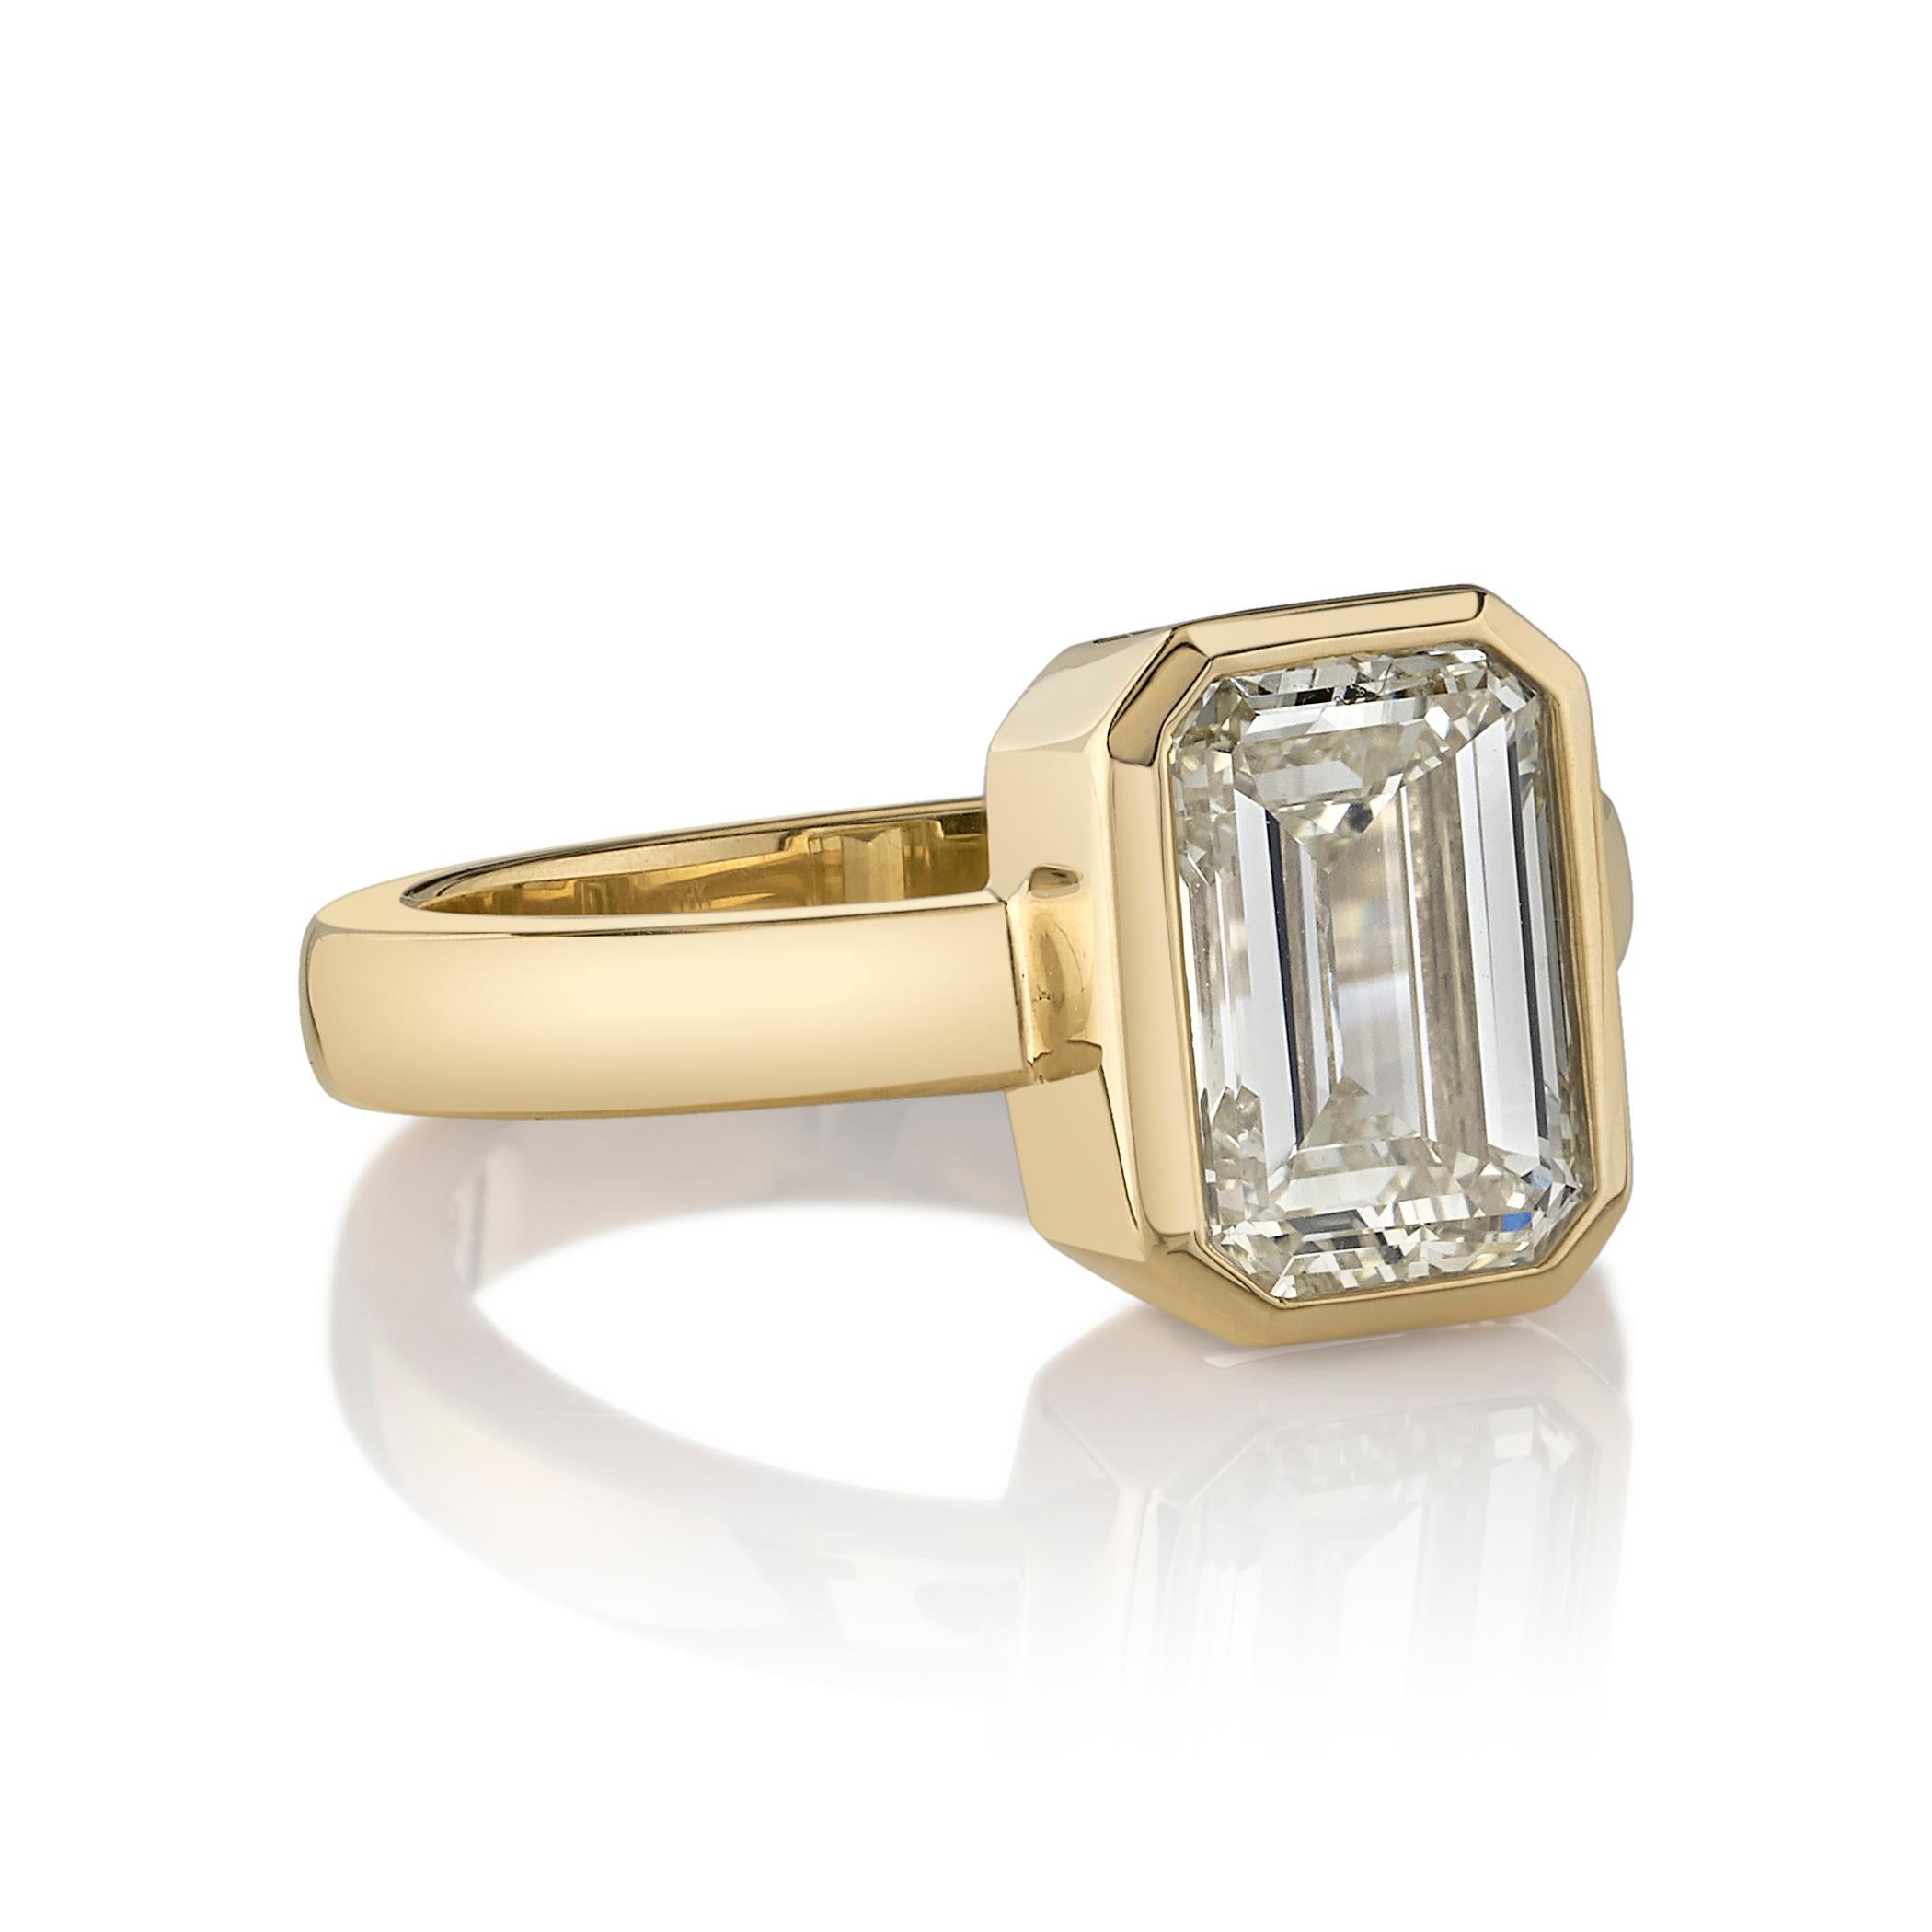 3.01ctw U-V/VVS2 GIA certified Emerald cut diamond set in a handcrafted 18K yellow gold mounting.

Our jewelry is made locally in Los Angeles and most pieces are made to order. For these made-to-order items, please allow 8-10 weeks for delivery.